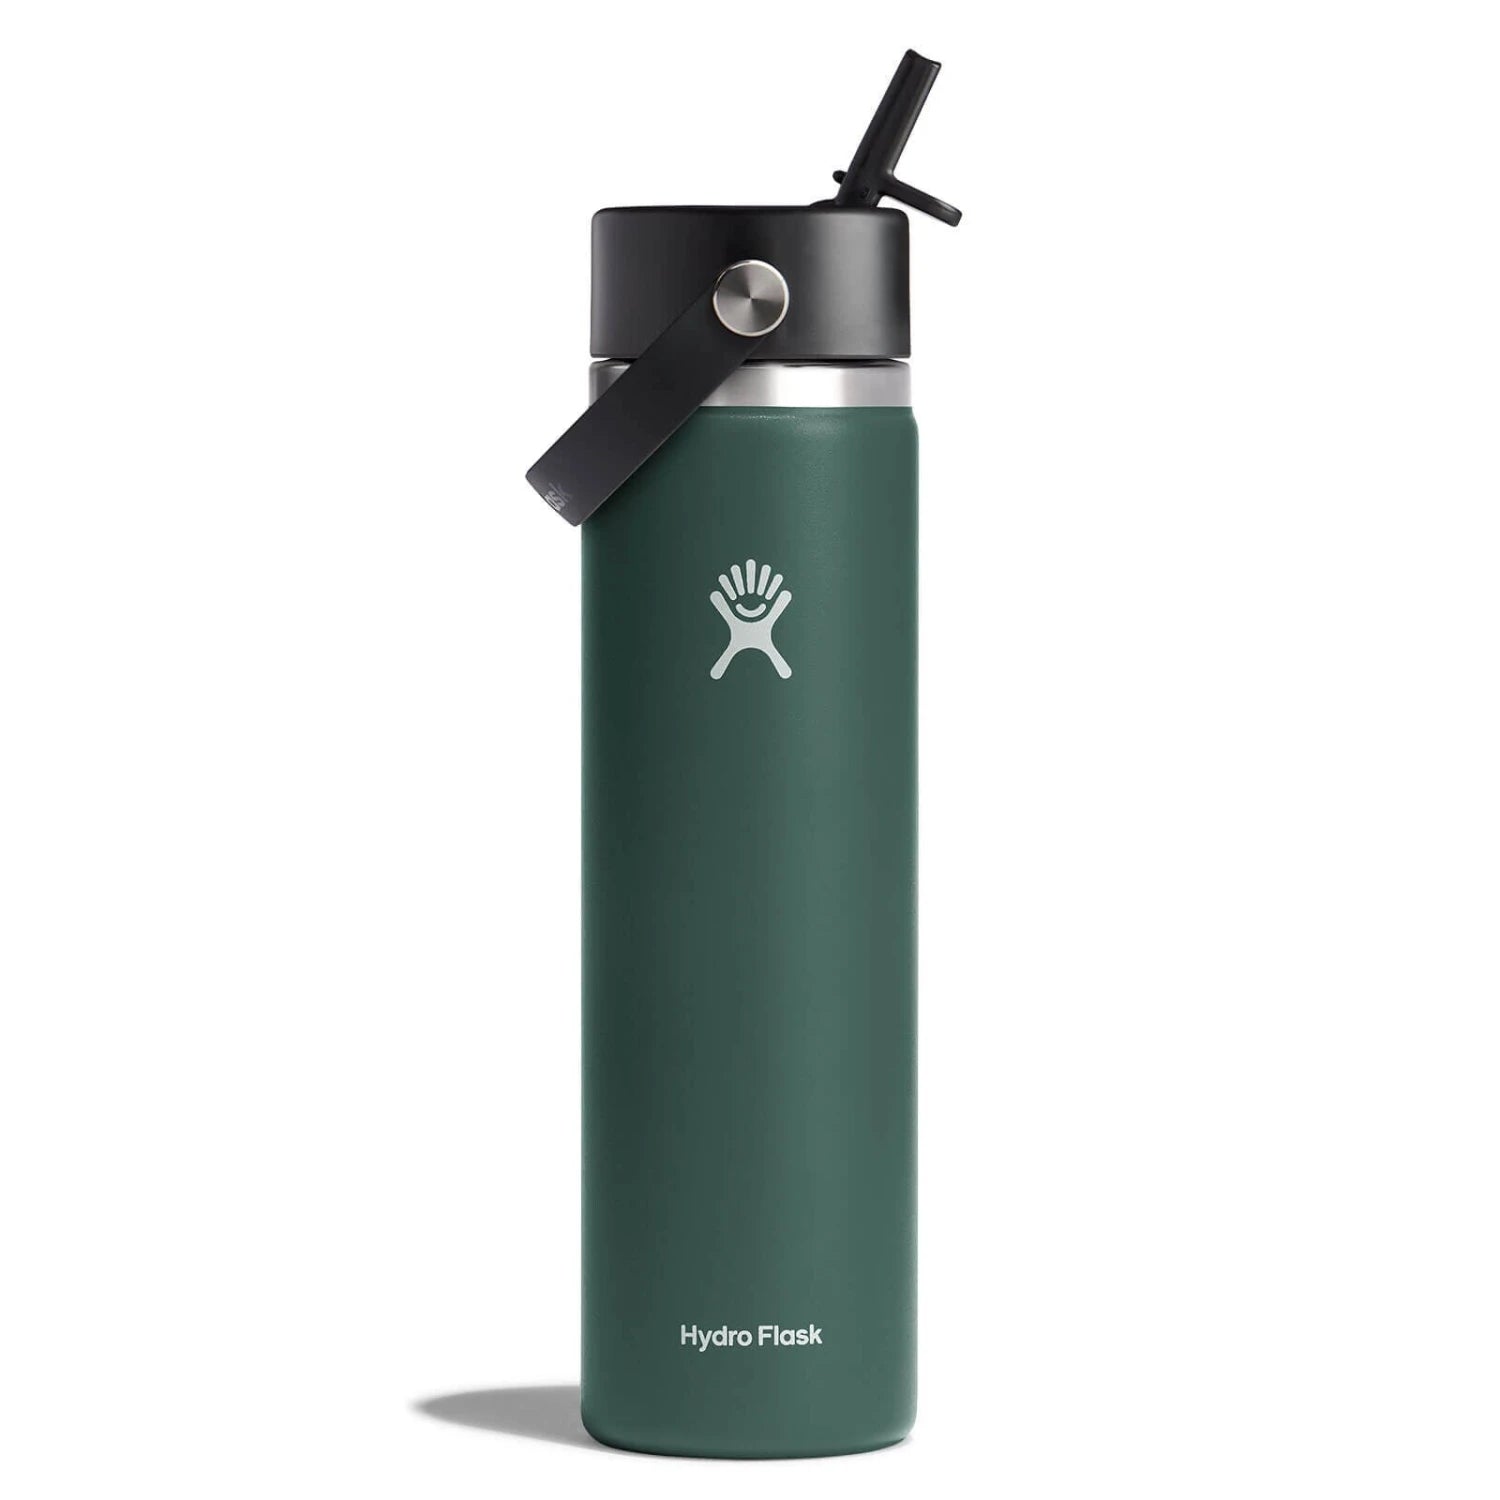 Hydro Flask 24oz Wide Mouth with Flex Straw Cap in fir